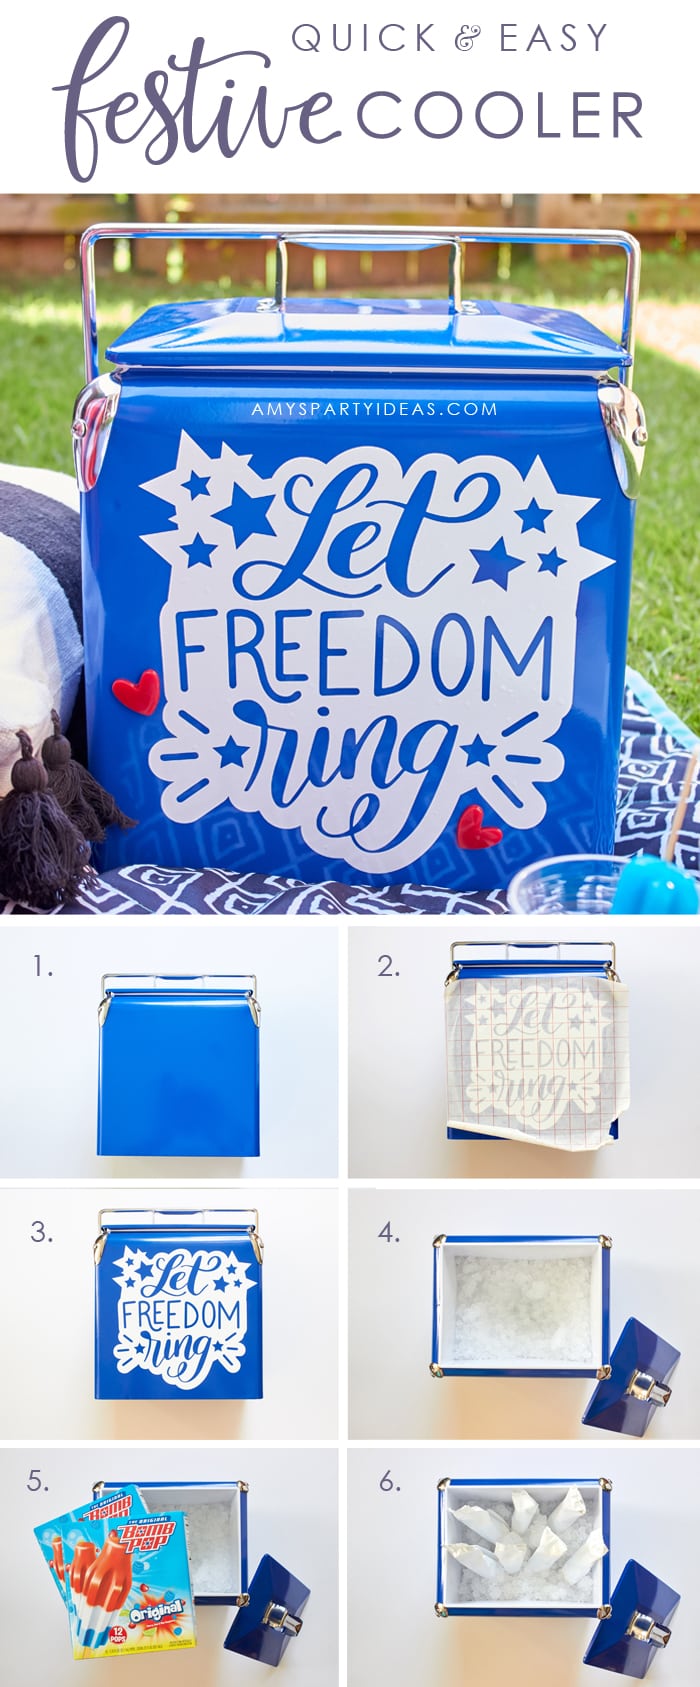 DIY Festive Fourth of July Cooler Tutorial | Last minute Fourth of July Party & Entertaining Ideas | The Original Bomb Pop® | from AmysPartyIdeas.com | Free Printables | Instant Download Party Supplies | #SoHoppinGood #BlueBunny #BombPop #ad